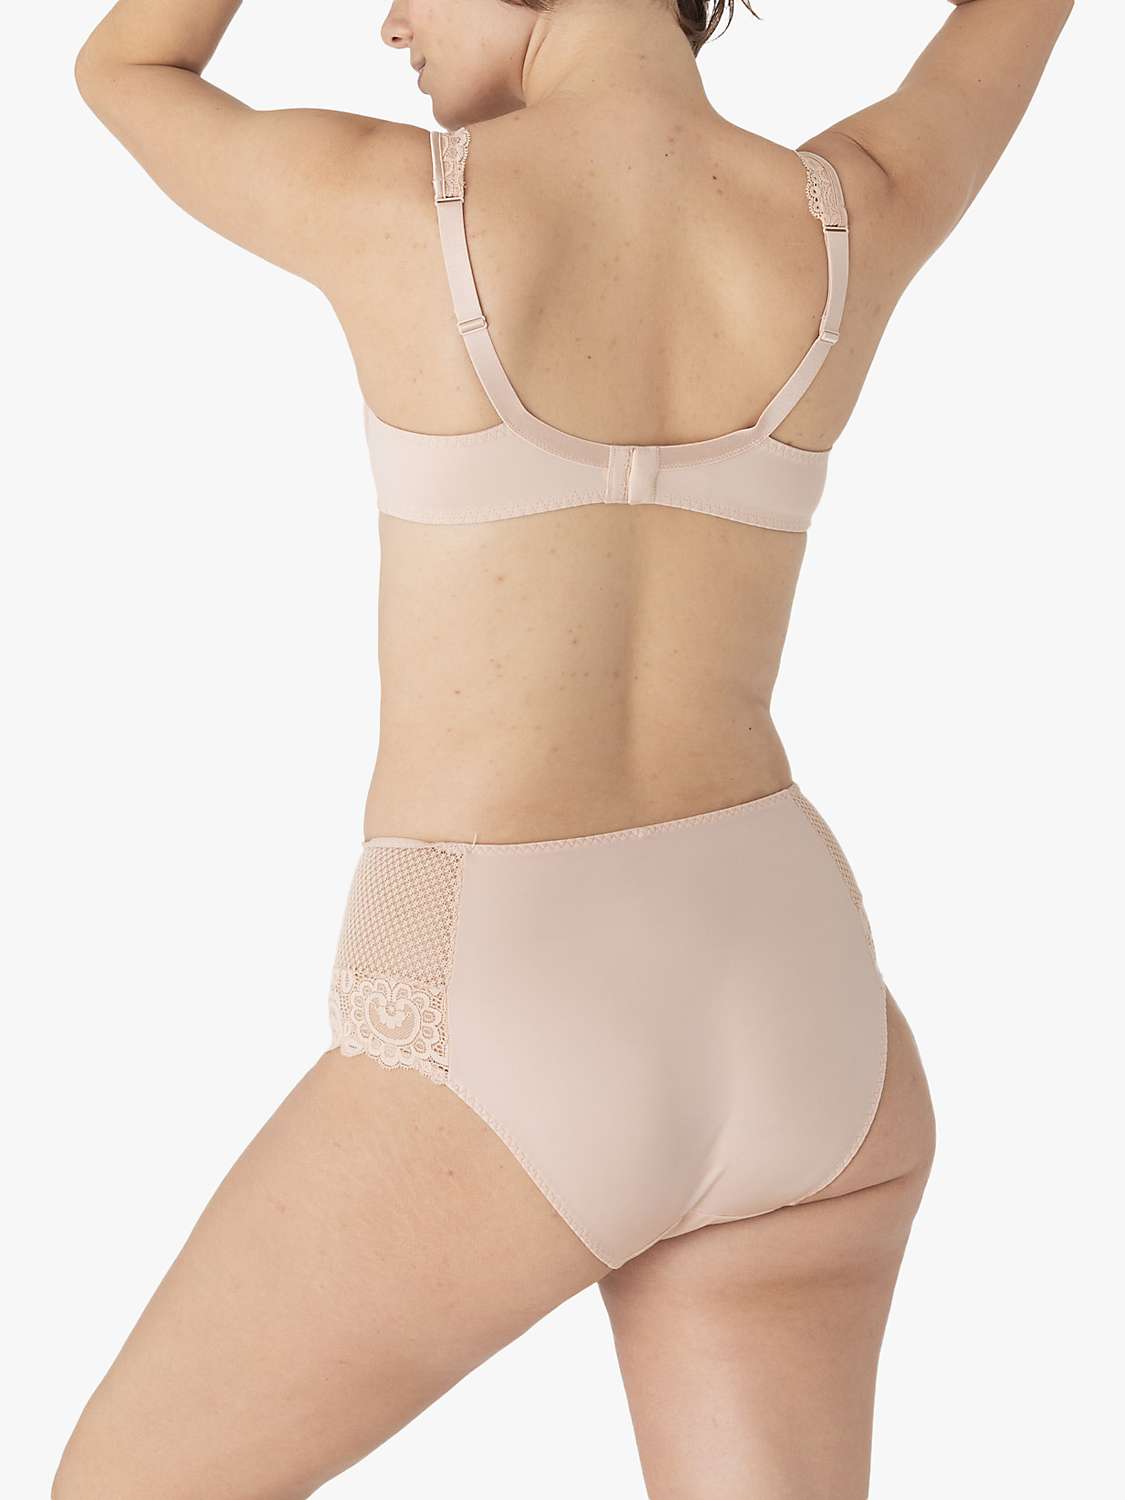 Buy Maison Lejaby Gaby Lace Balcony Underwired Bra, Rose Online at johnlewis.com